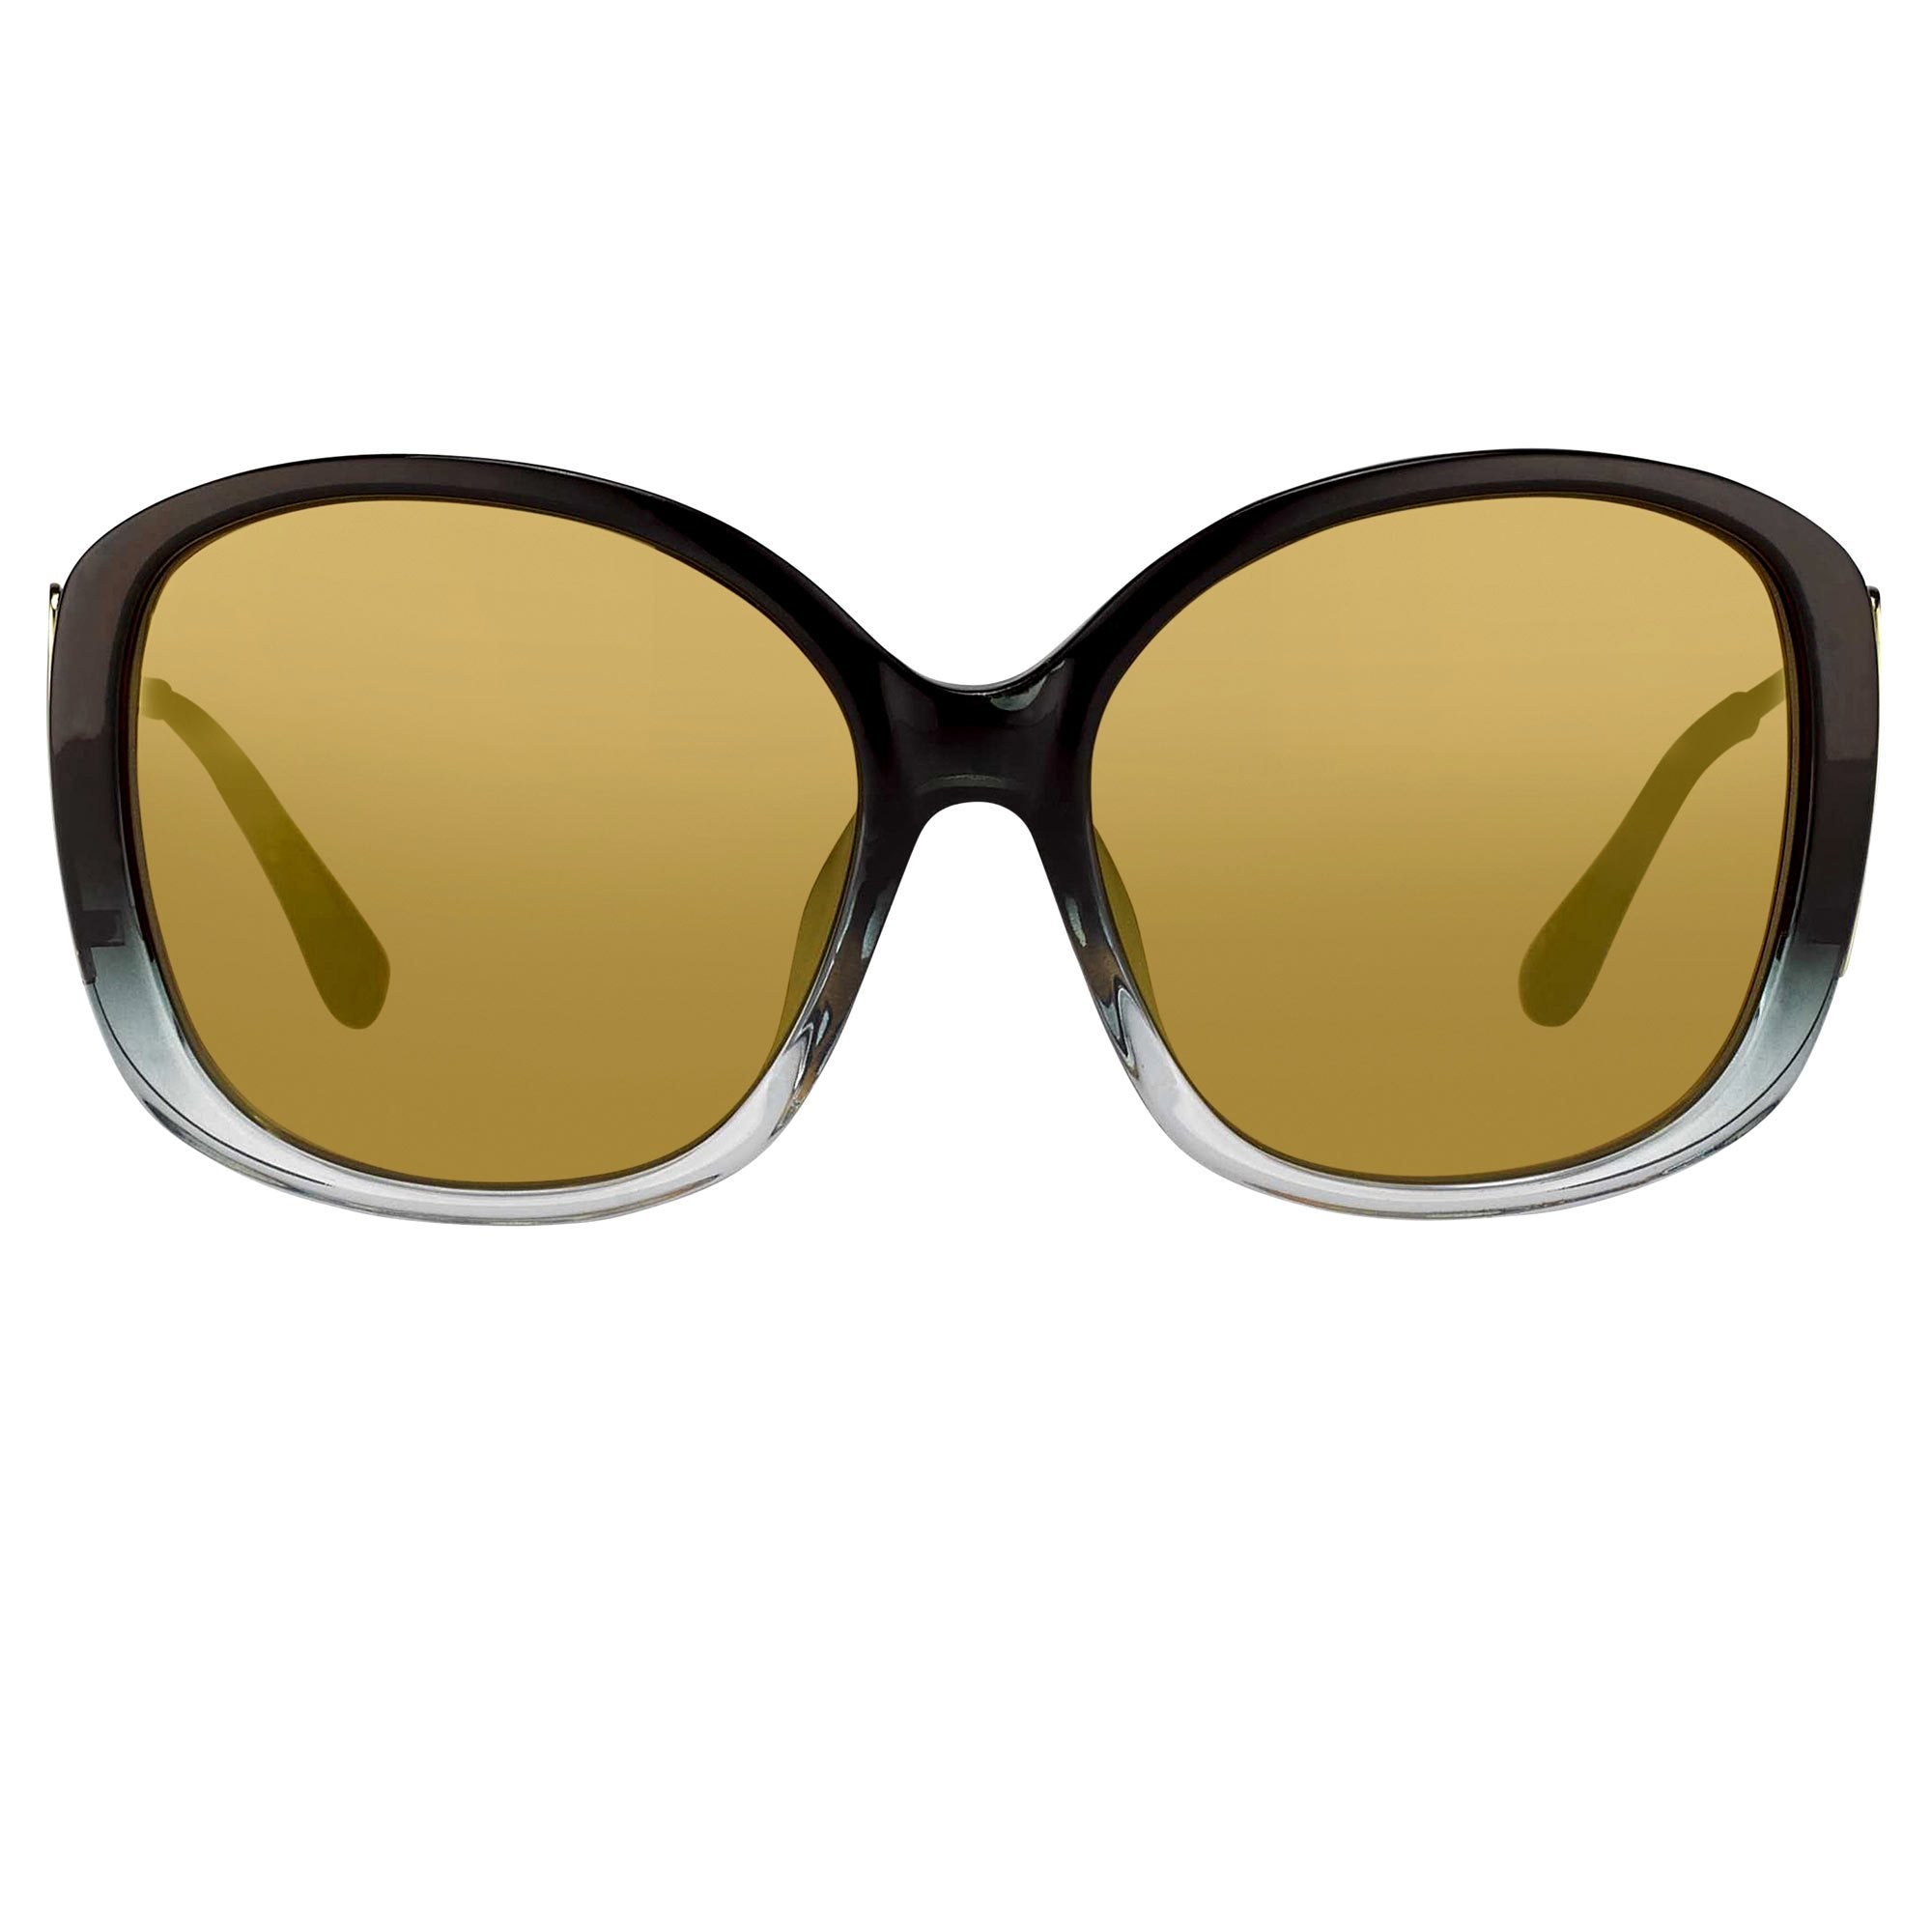 Prabal Gurung Sunglasses Oversized Female Black to Clear/Gold Frame Category 2 Gold Mirror Lenses PG23C1SUN - Watches & Crystals